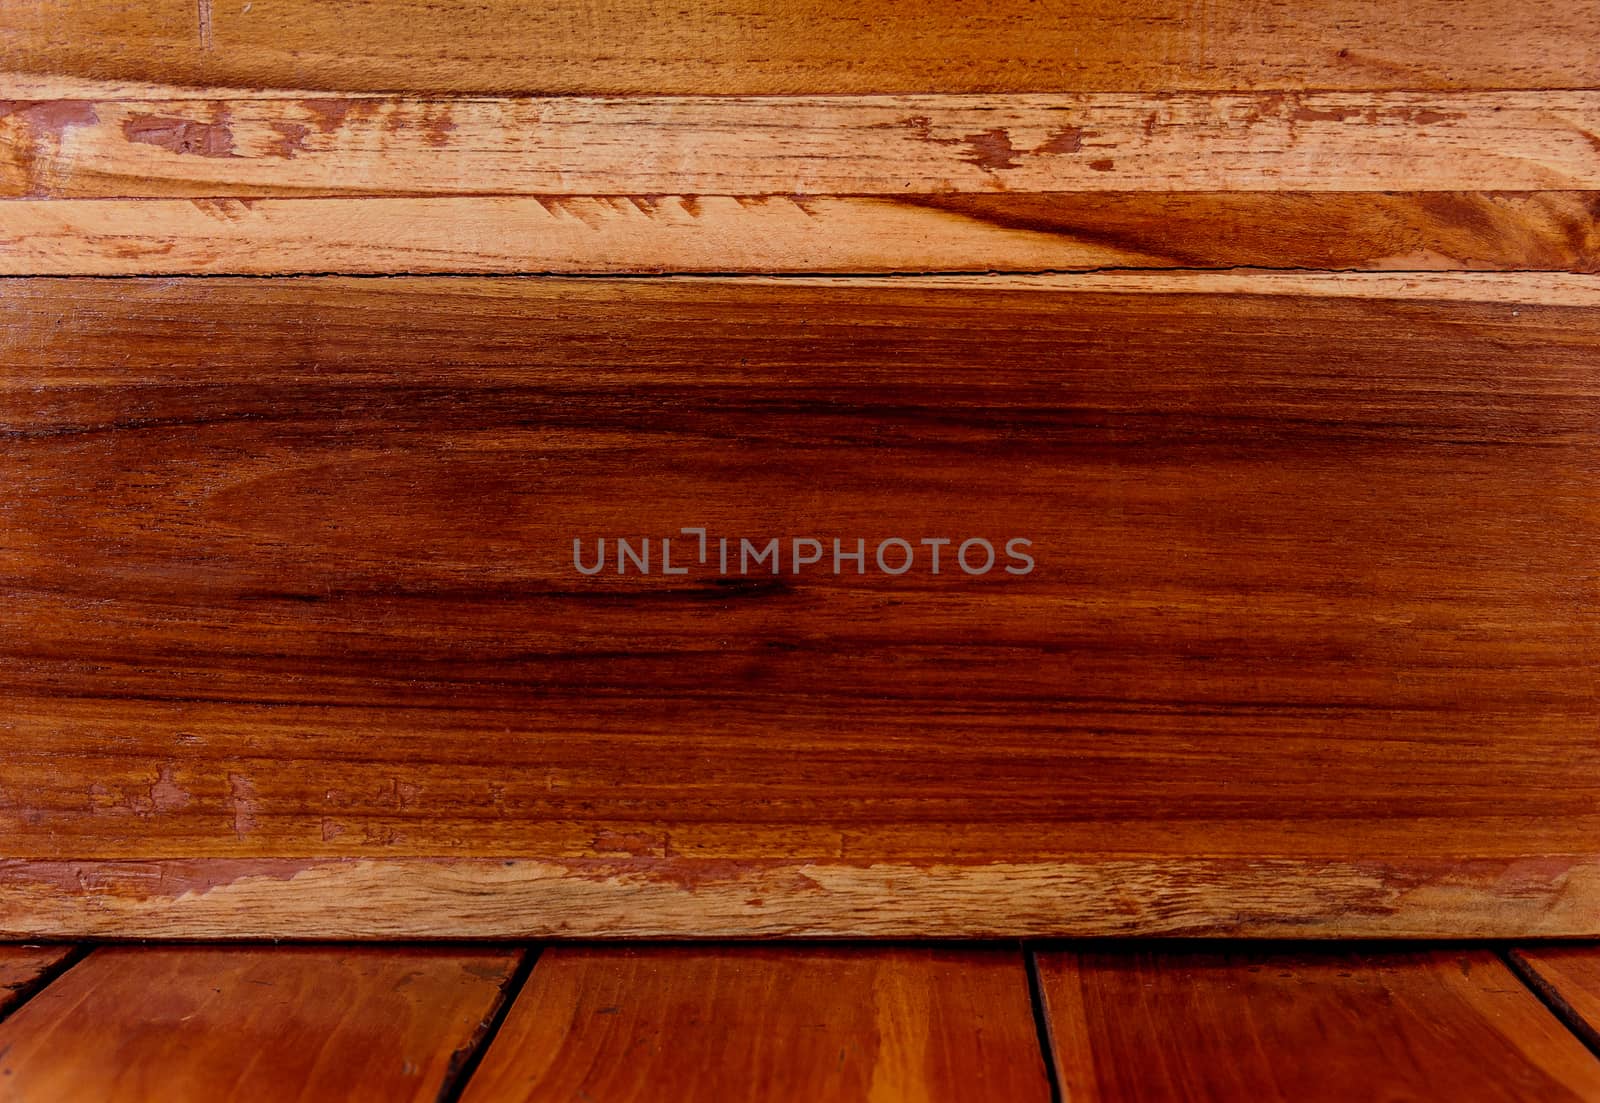 Wood background is brown. The imaging sharp images.